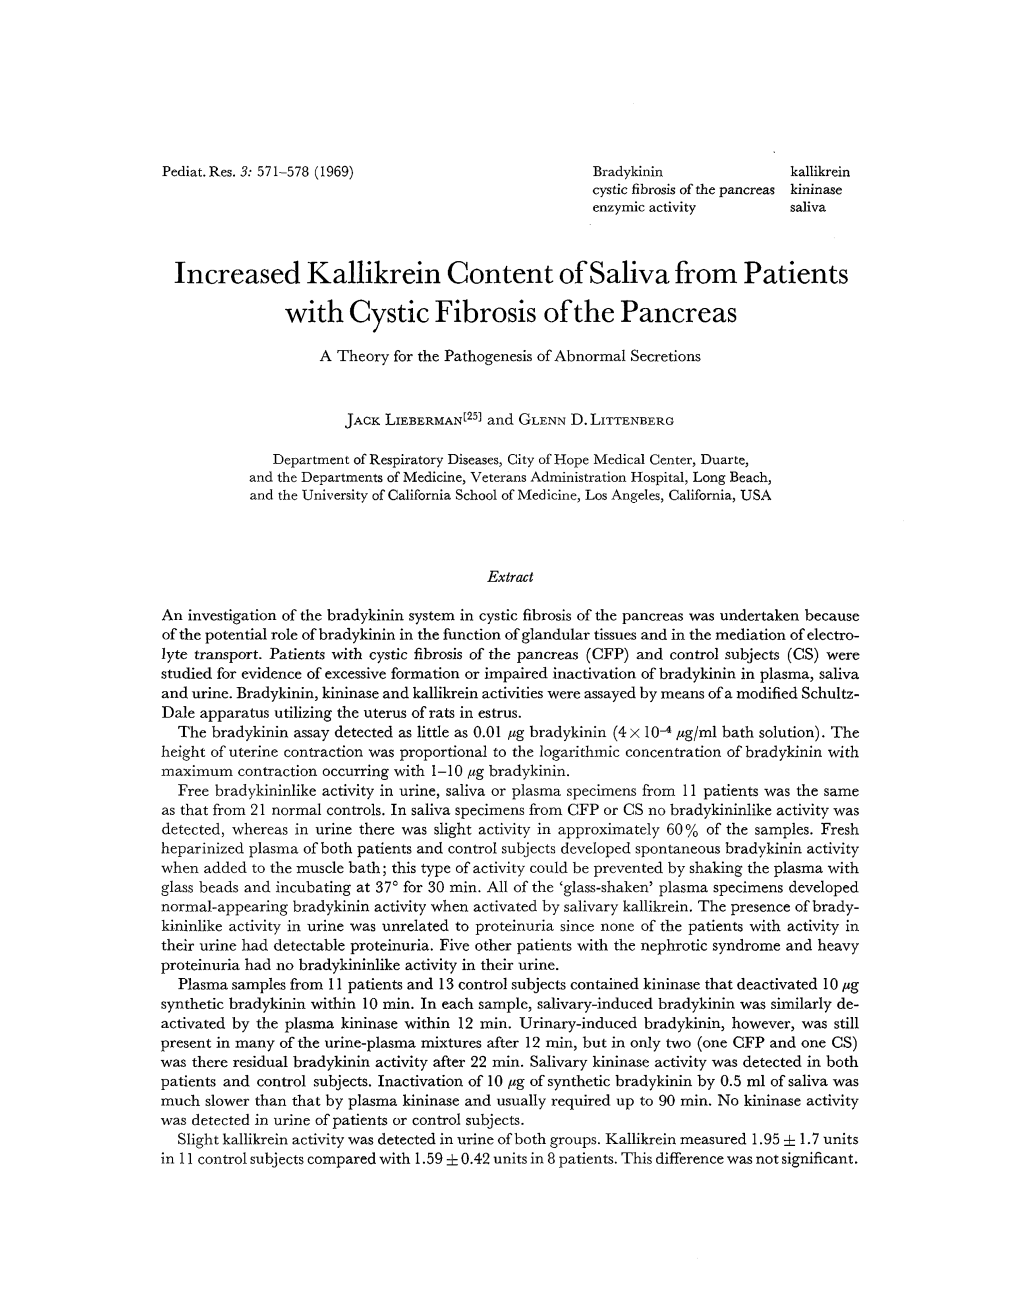 Increased Kallikrein Content of Saliva from Patients with Cystic Fibrosis of the Pancreas